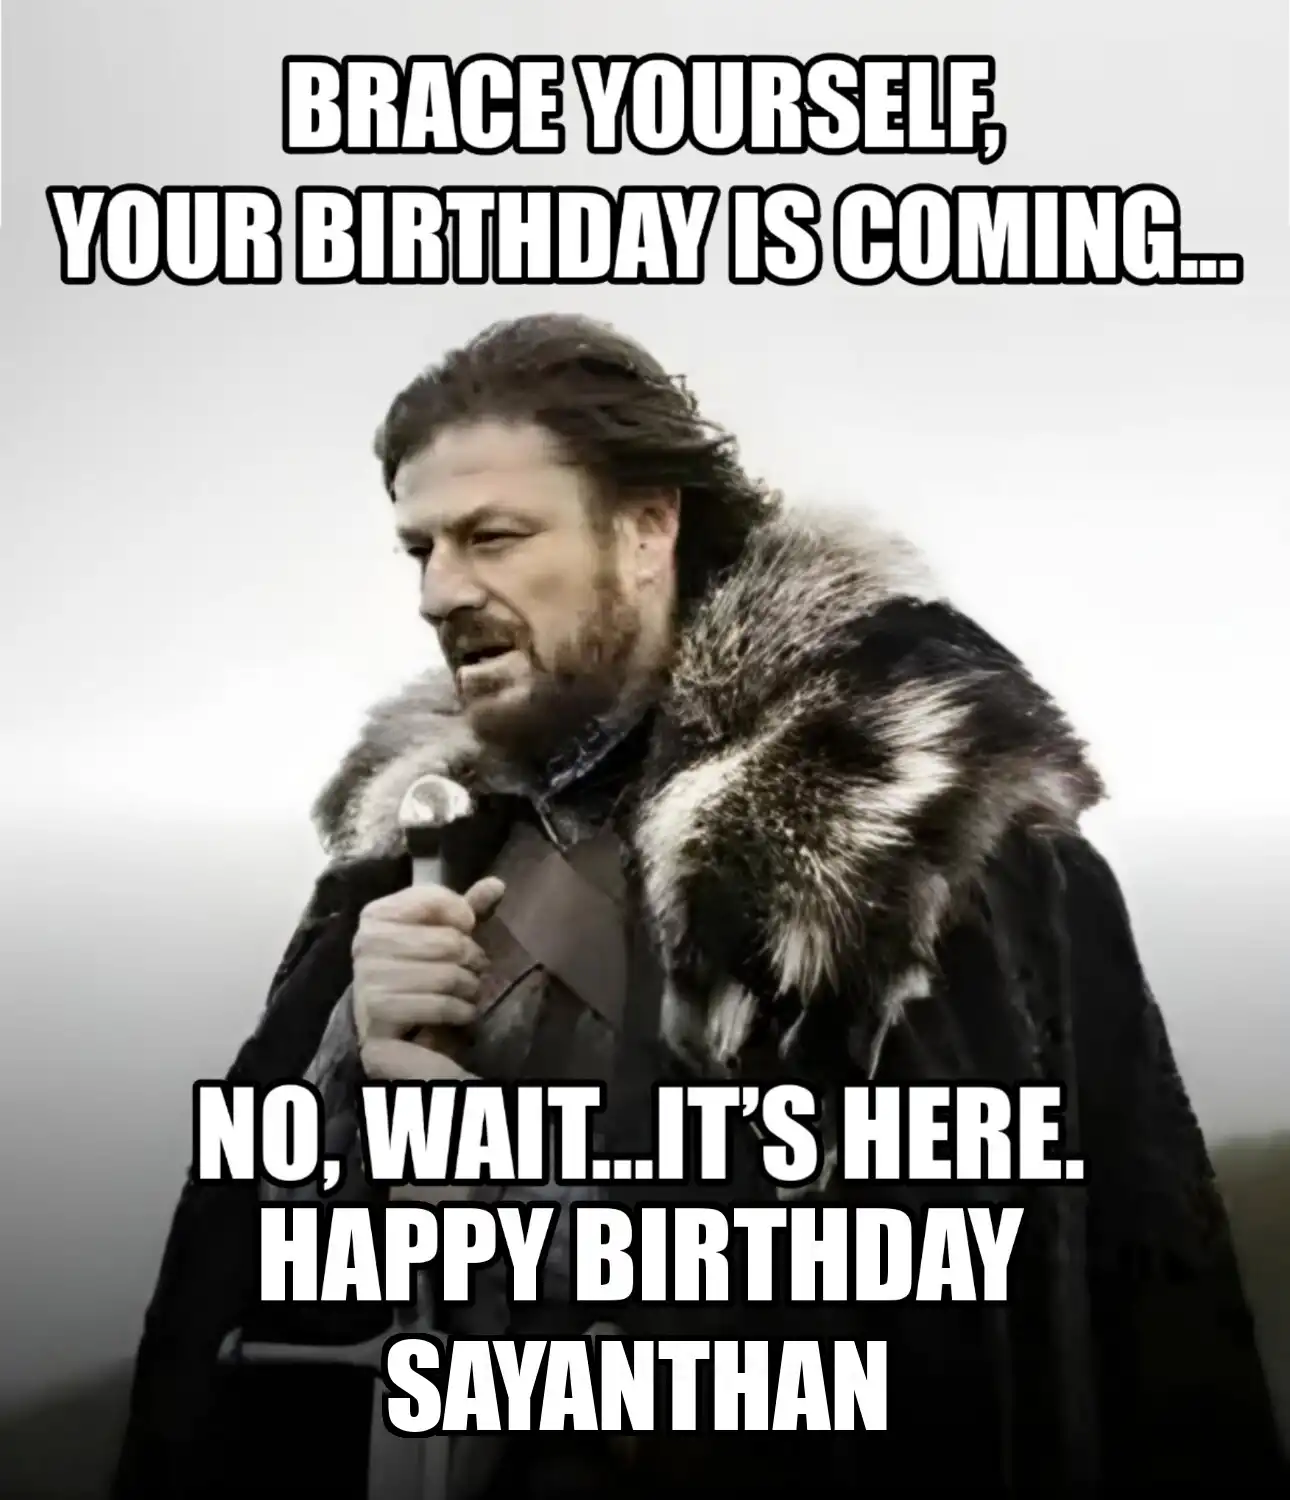 Happy Birthday Sayanthan Brace Yourself Your Birthday Is Coming Meme